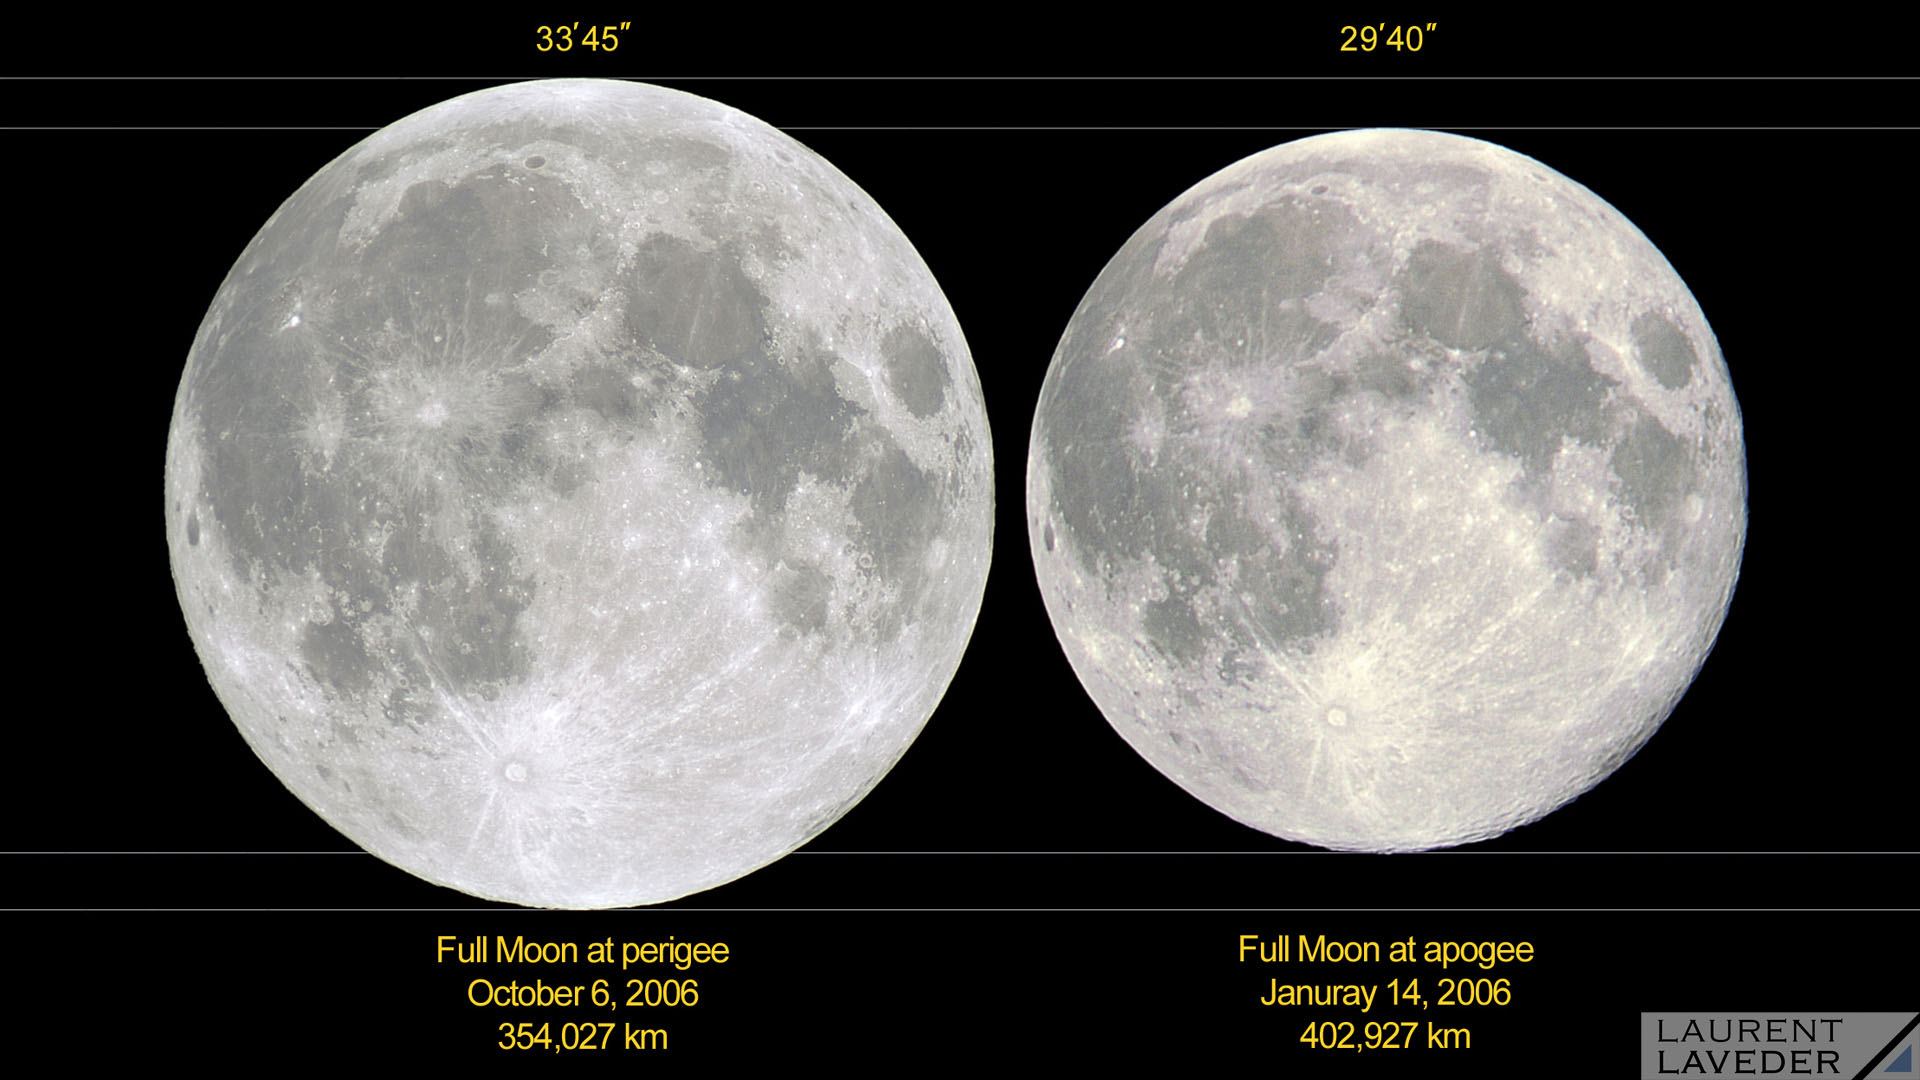 The full Moon seen at Perigee (left) and Apogee (right). Credit: SkyandTelescope.com